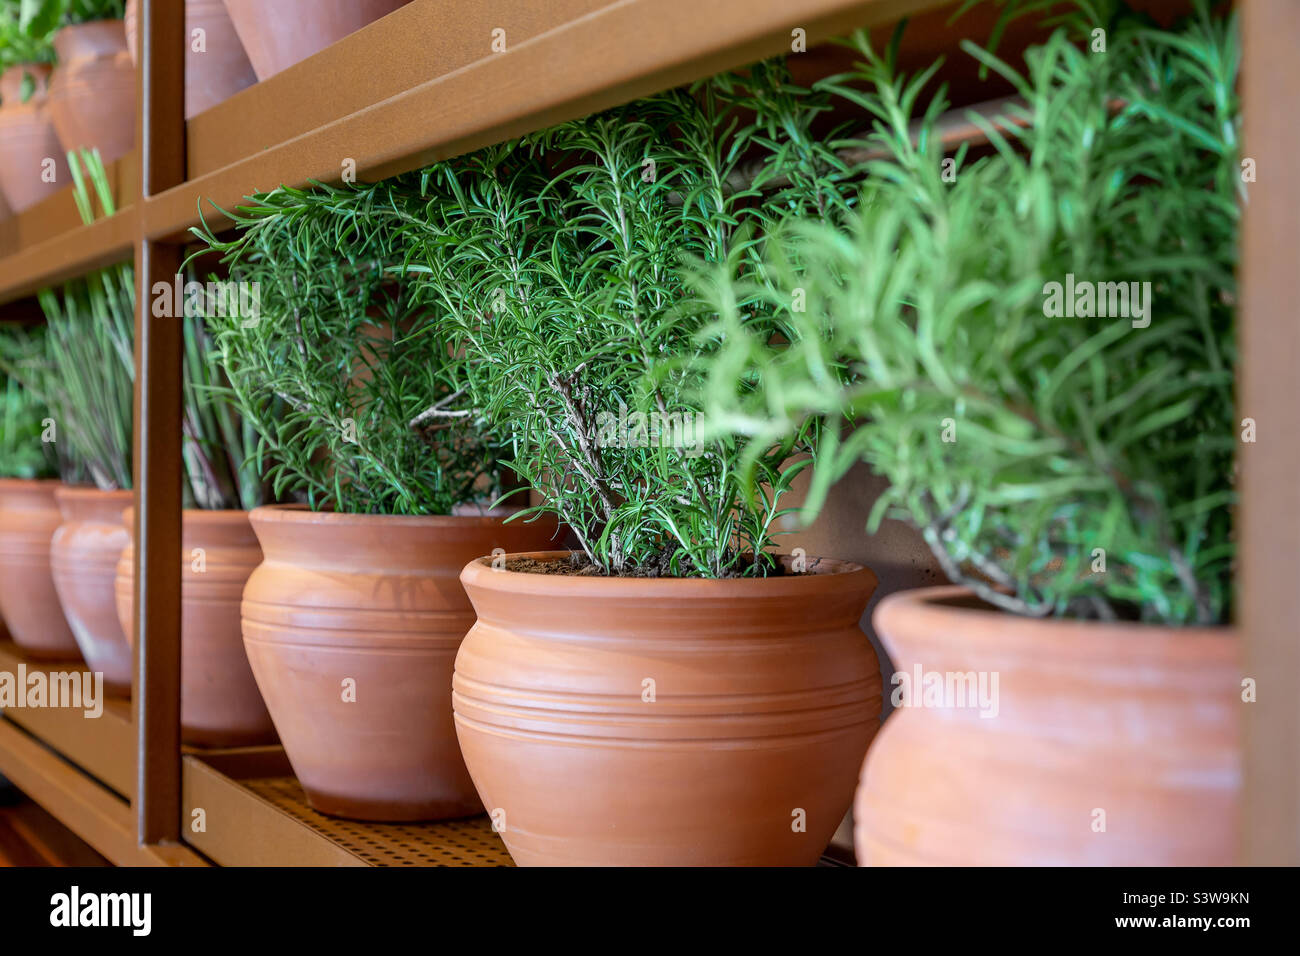 Fresh rosemary plants in pots, sustainable living concept Stock Photo